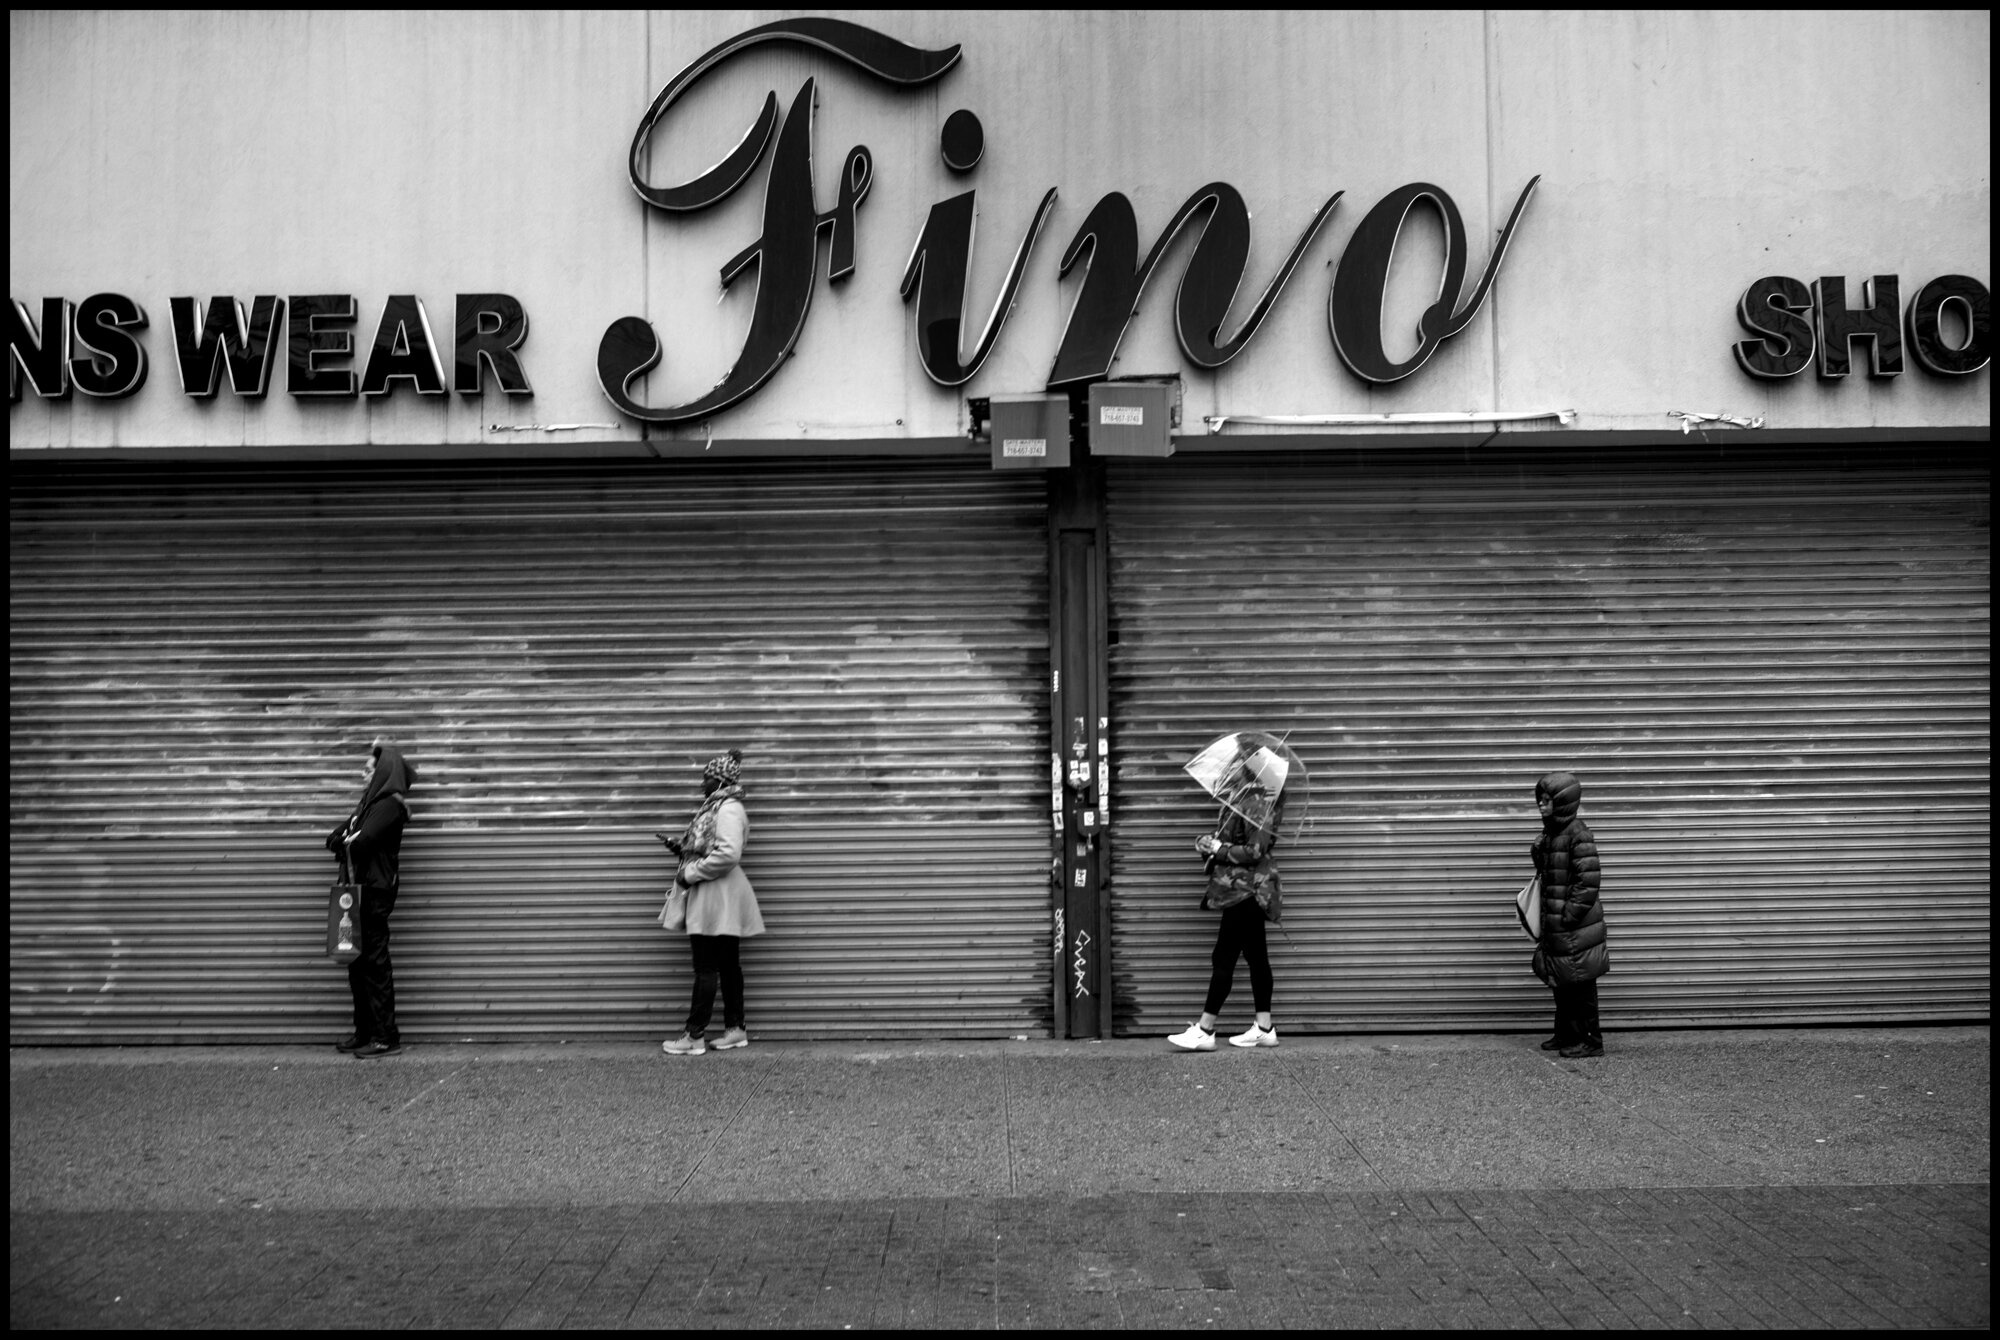  People social-distance in front of a store on 125th Street in Harlem.   March 28, 2020. © Peter Turnley  .ID# 06-007 